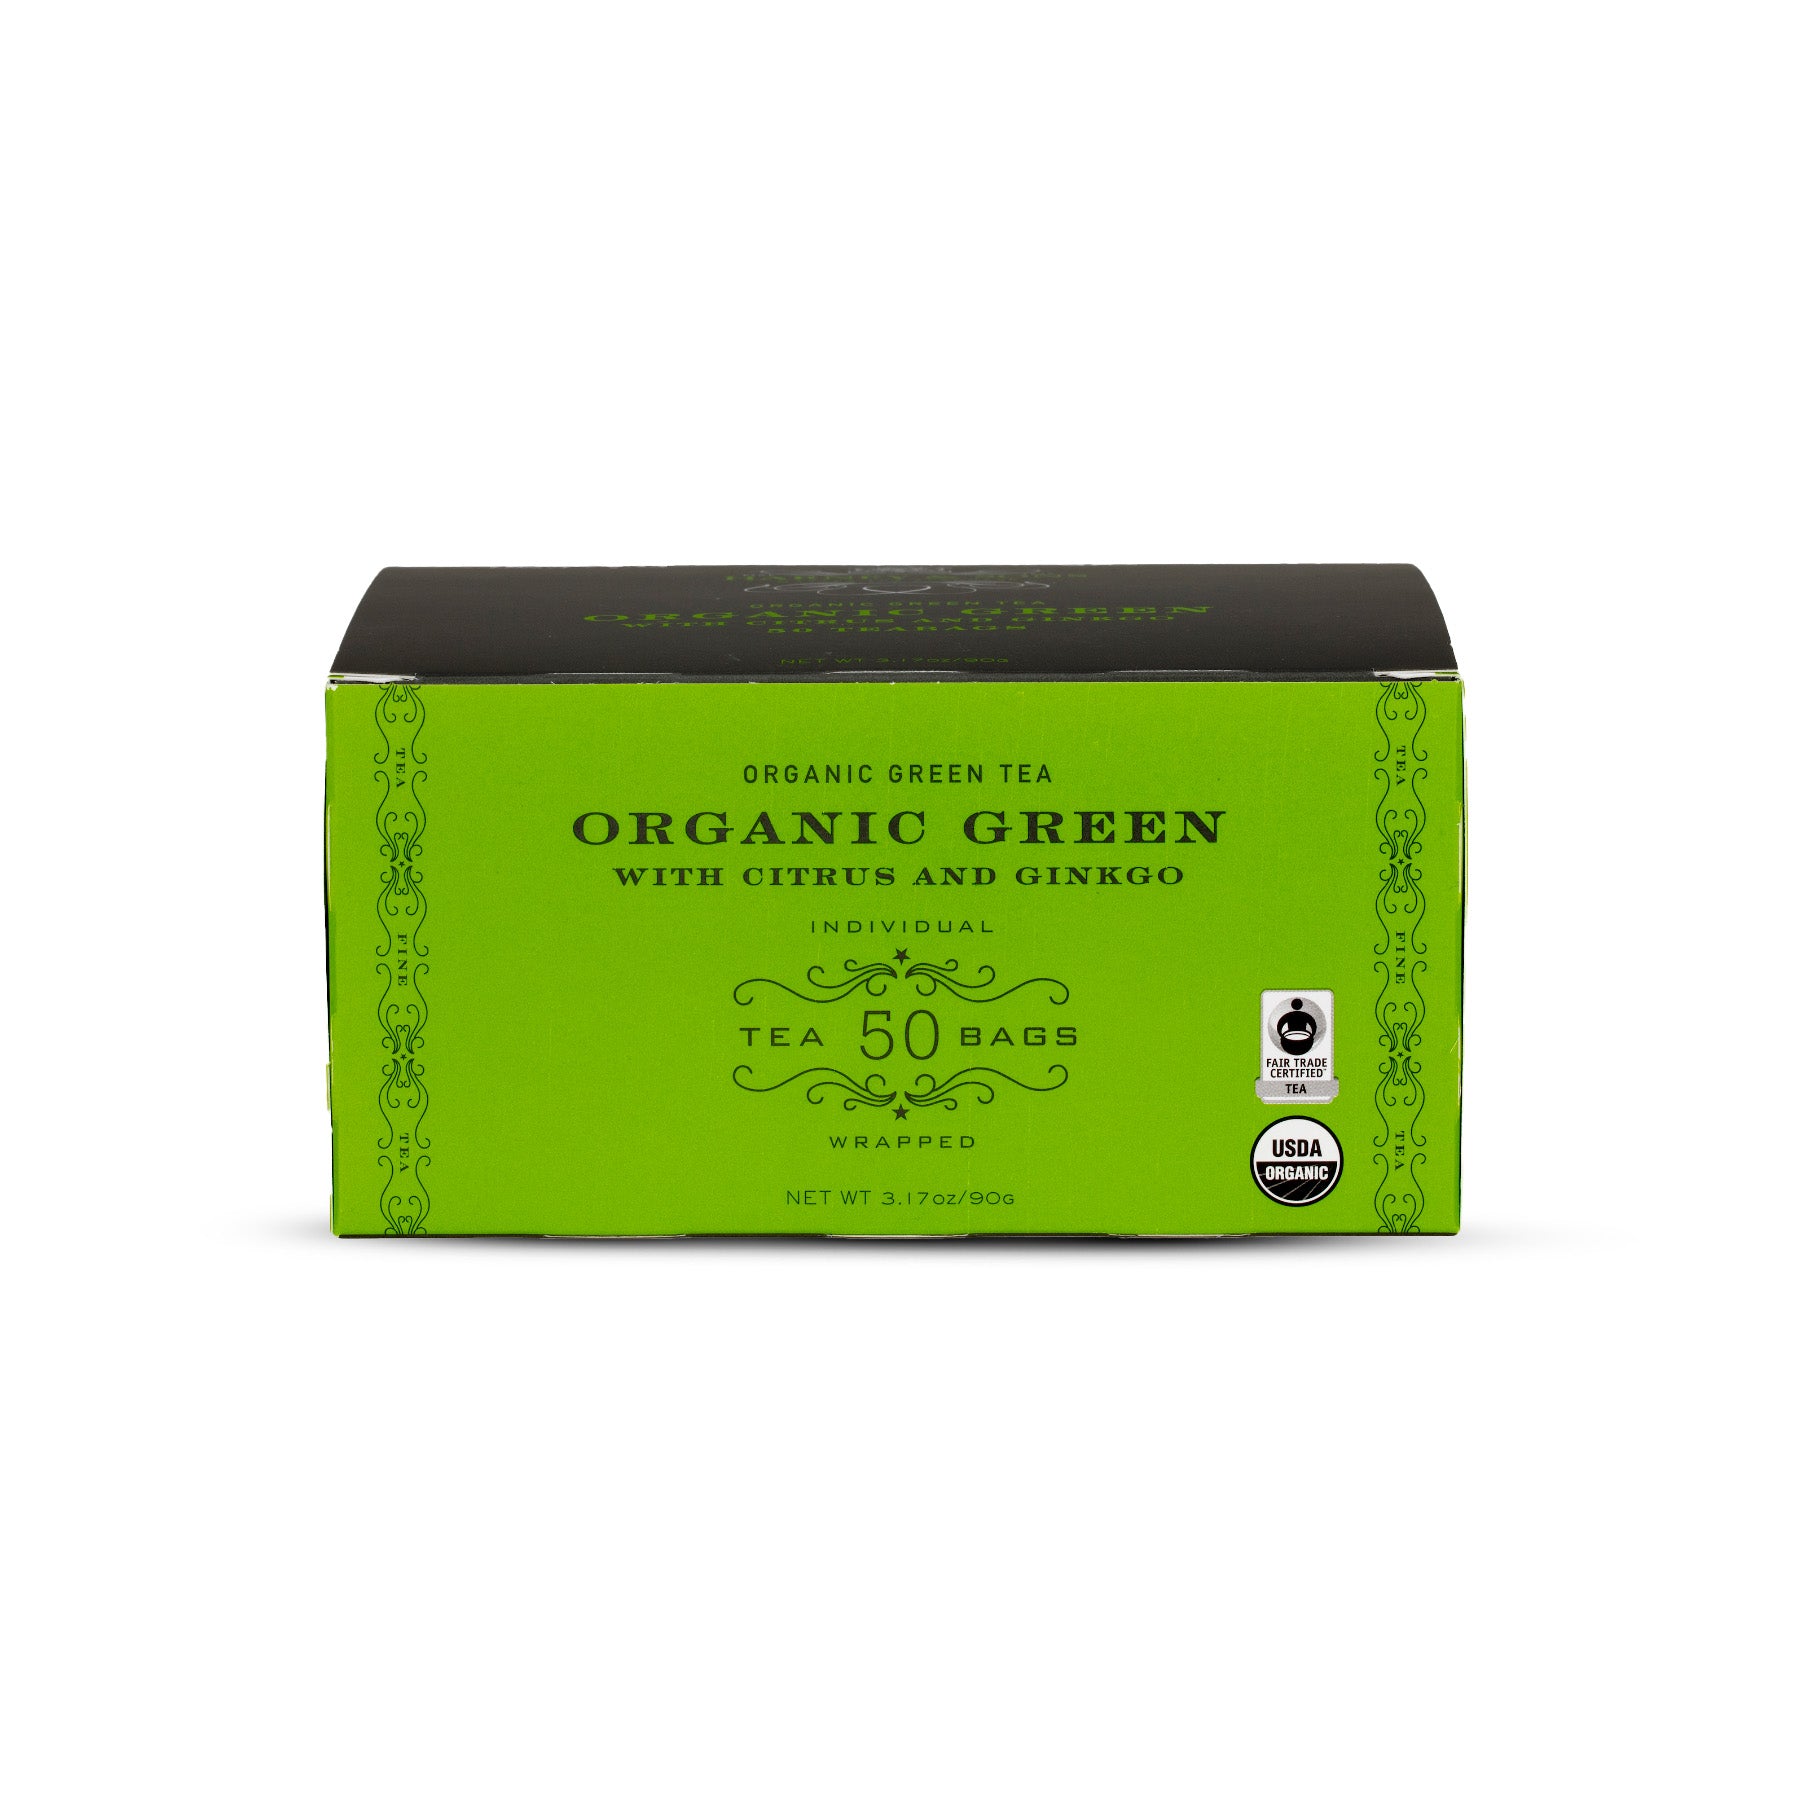 Organic Green with Citrus & Ginkgo - Teabags 50 CT Foil Wrapped Teabags - Harney & Sons Fine Teas Europe